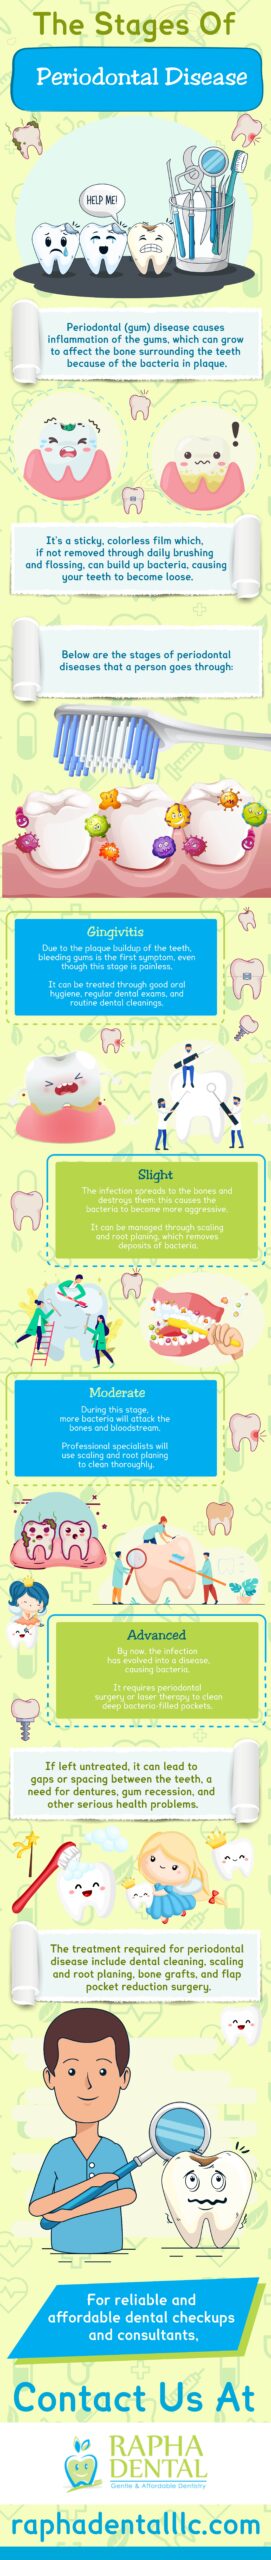 The Stages Of Periodontal Disease